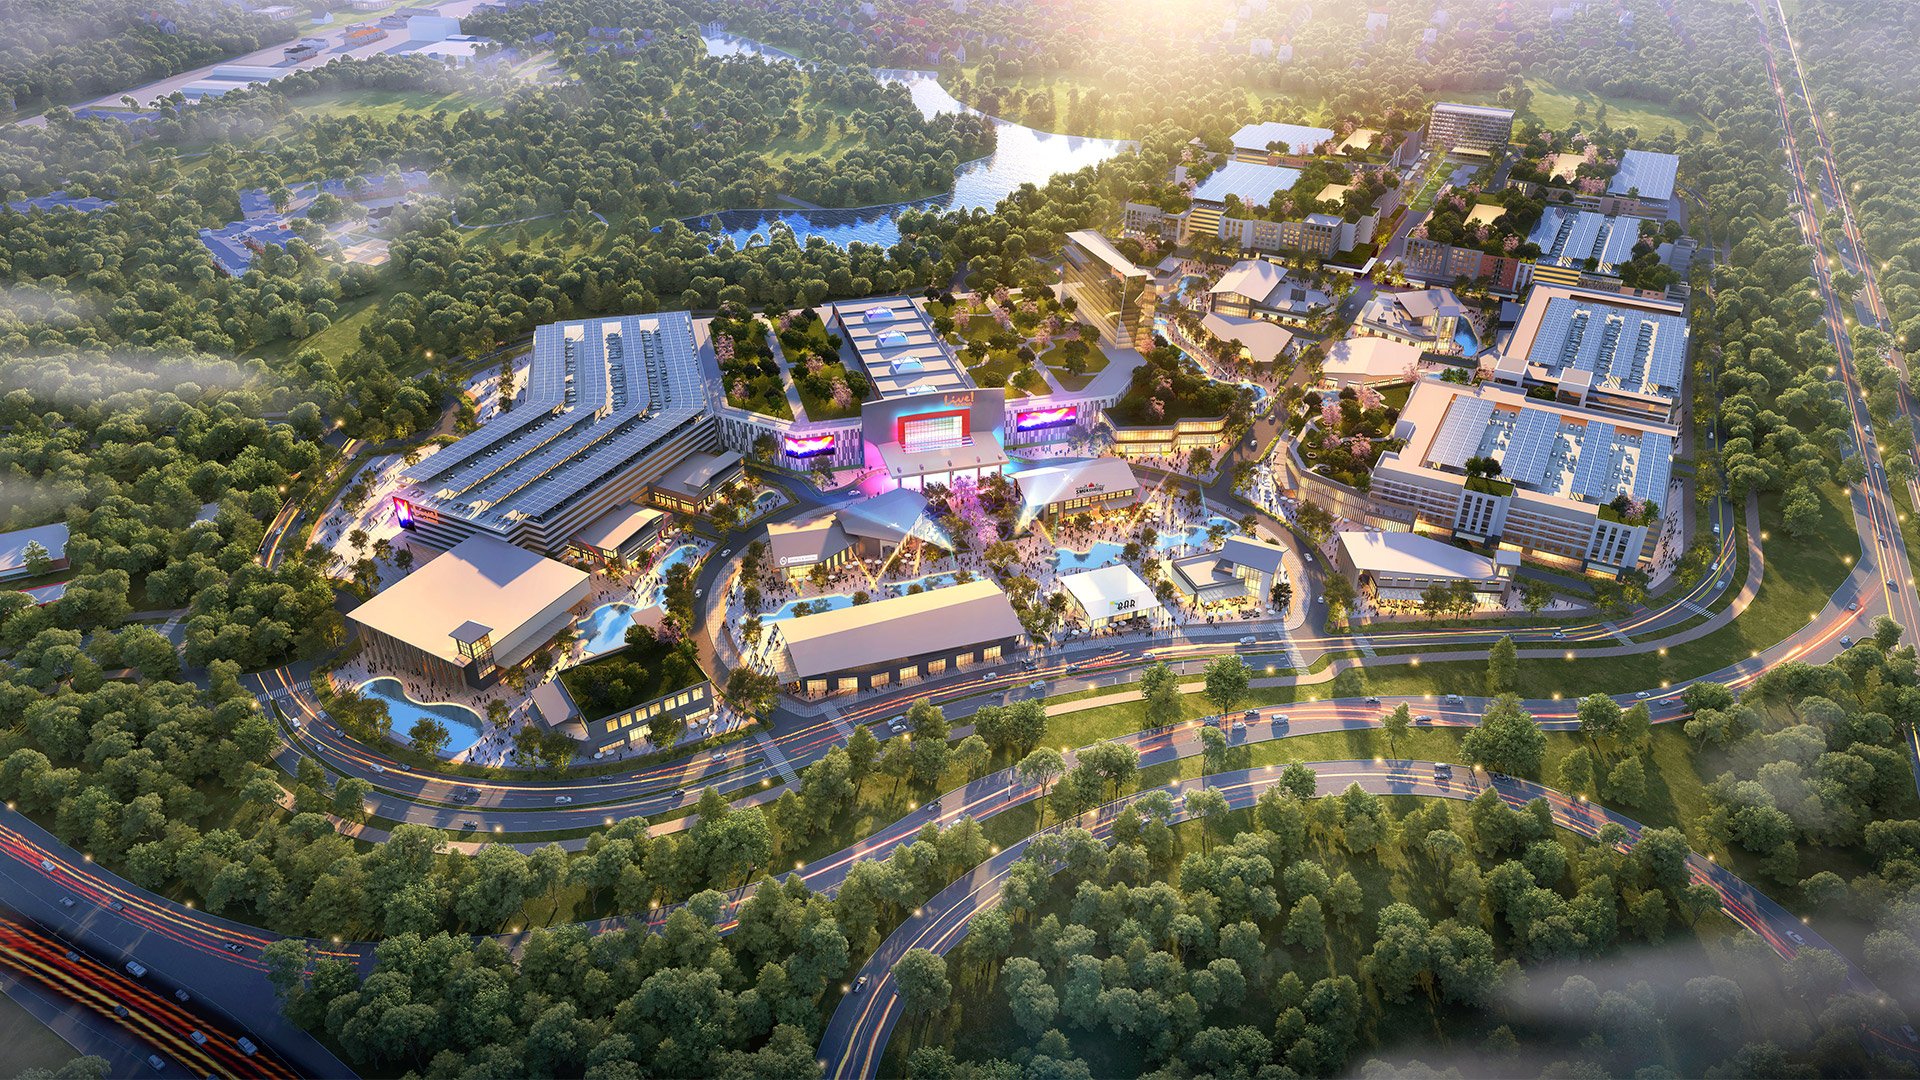 Virginia: City council selects Cordish as preferred casino vendor for Petersburg project